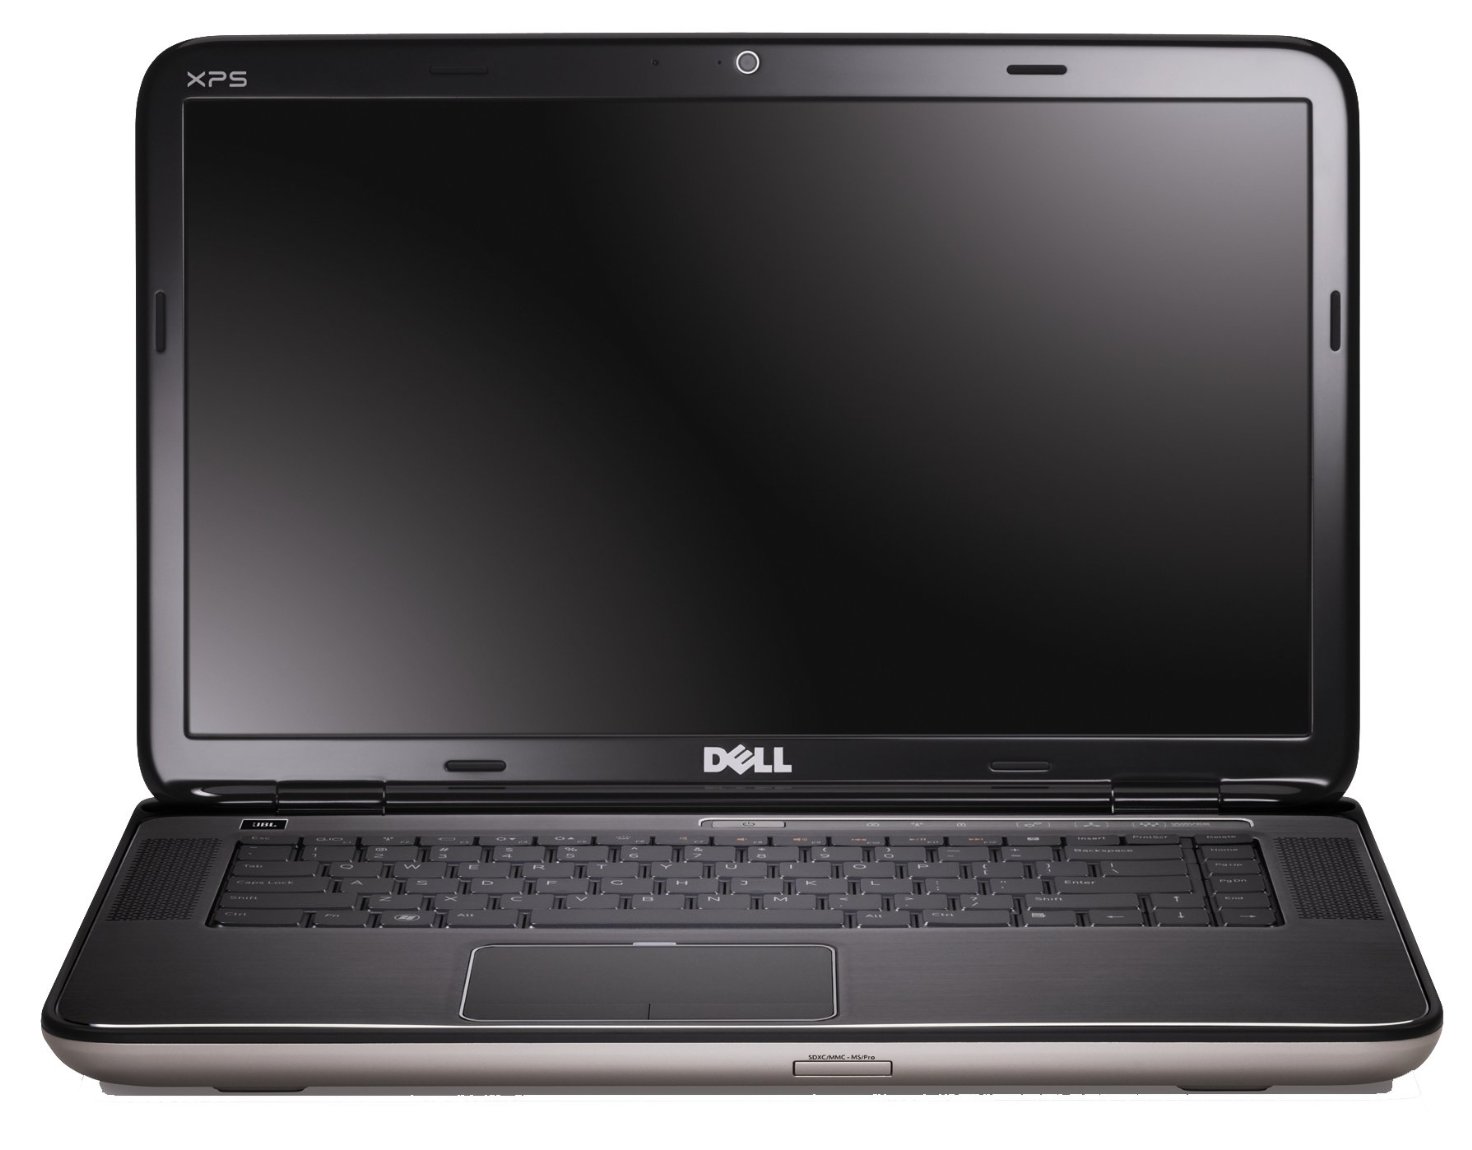  Dell XPS 15 7590-6640  #1